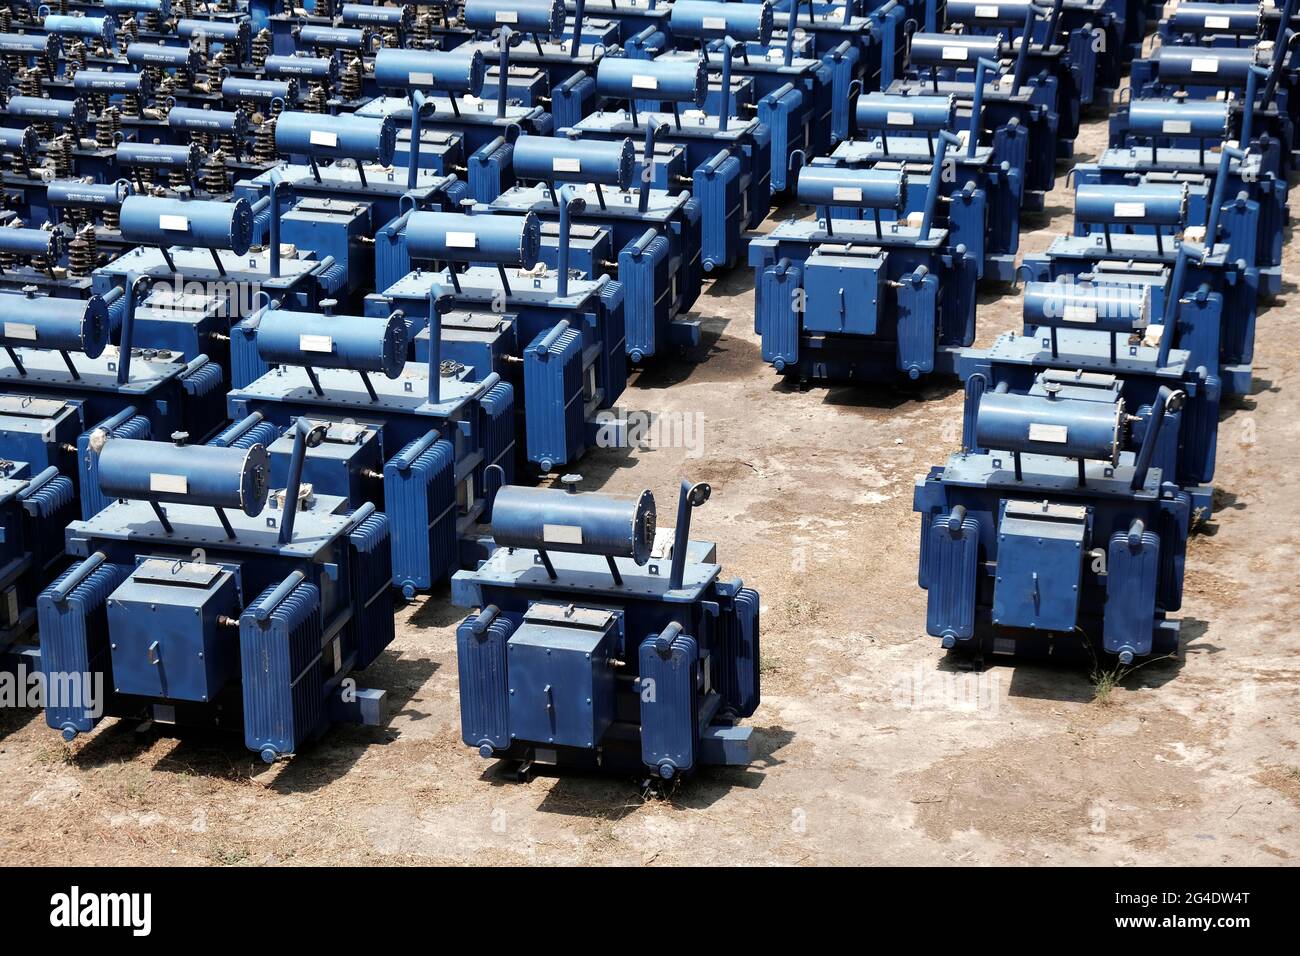 Blue color High voltage power transformer in lager quantity in godown open area. Stock Photo